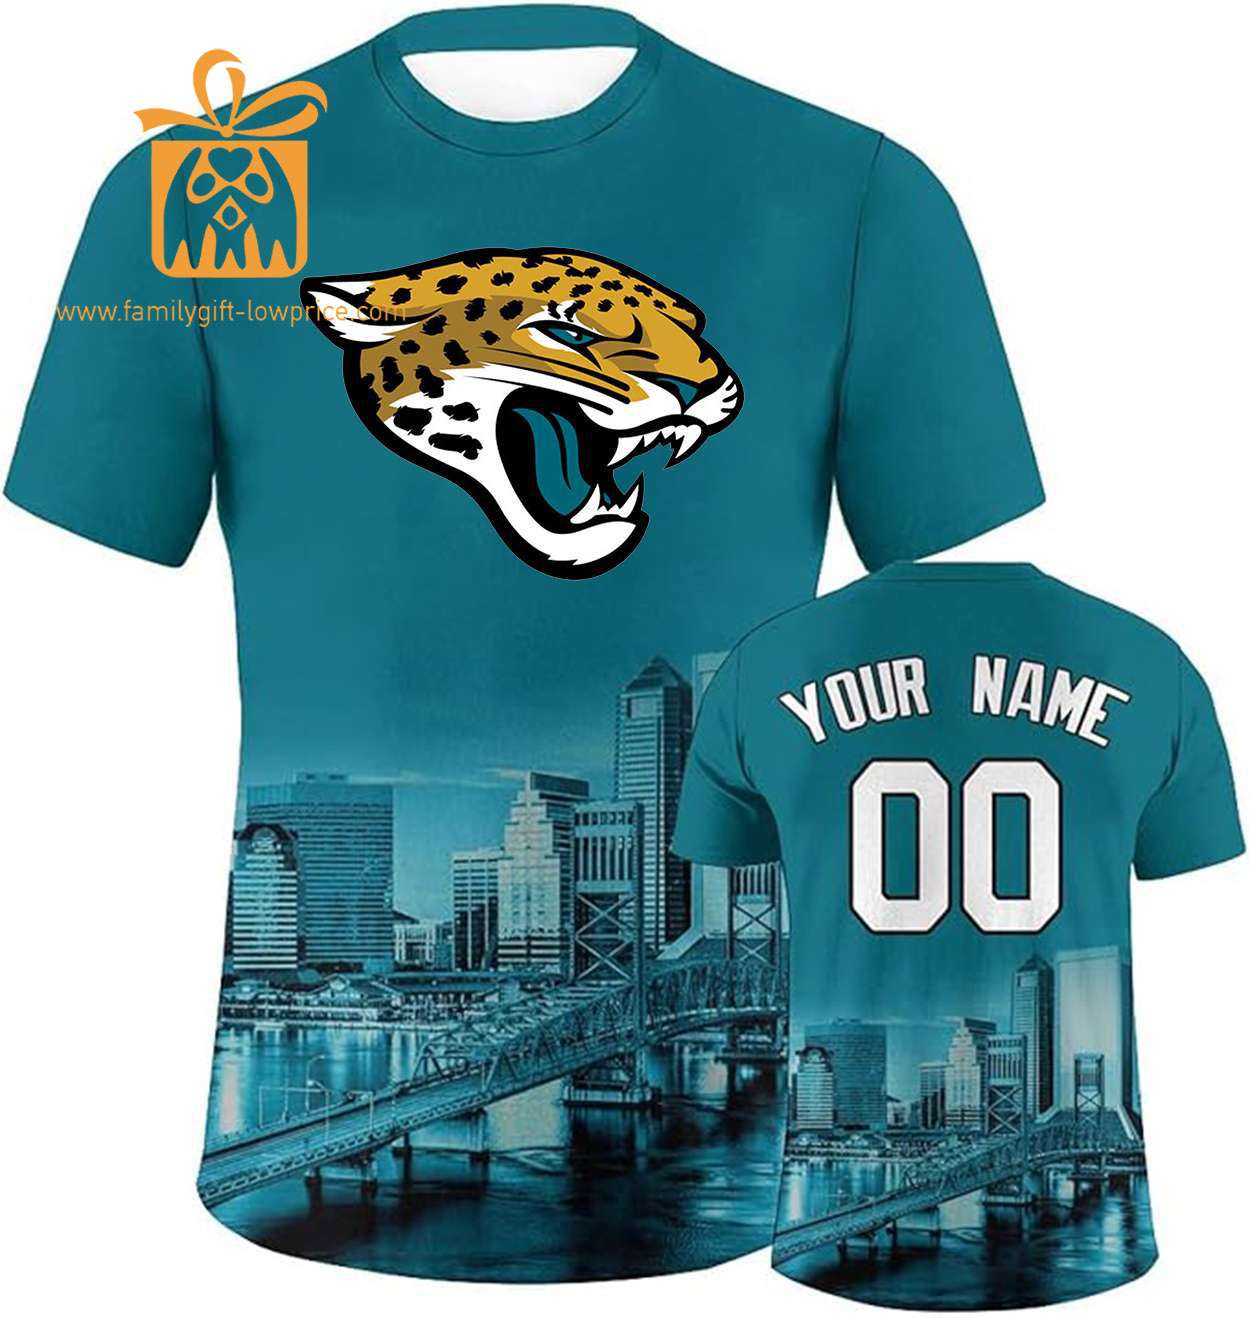 Jacksonville Jaguars Custom Football Shirts - Personalized Name & Number, Ideal for Fans